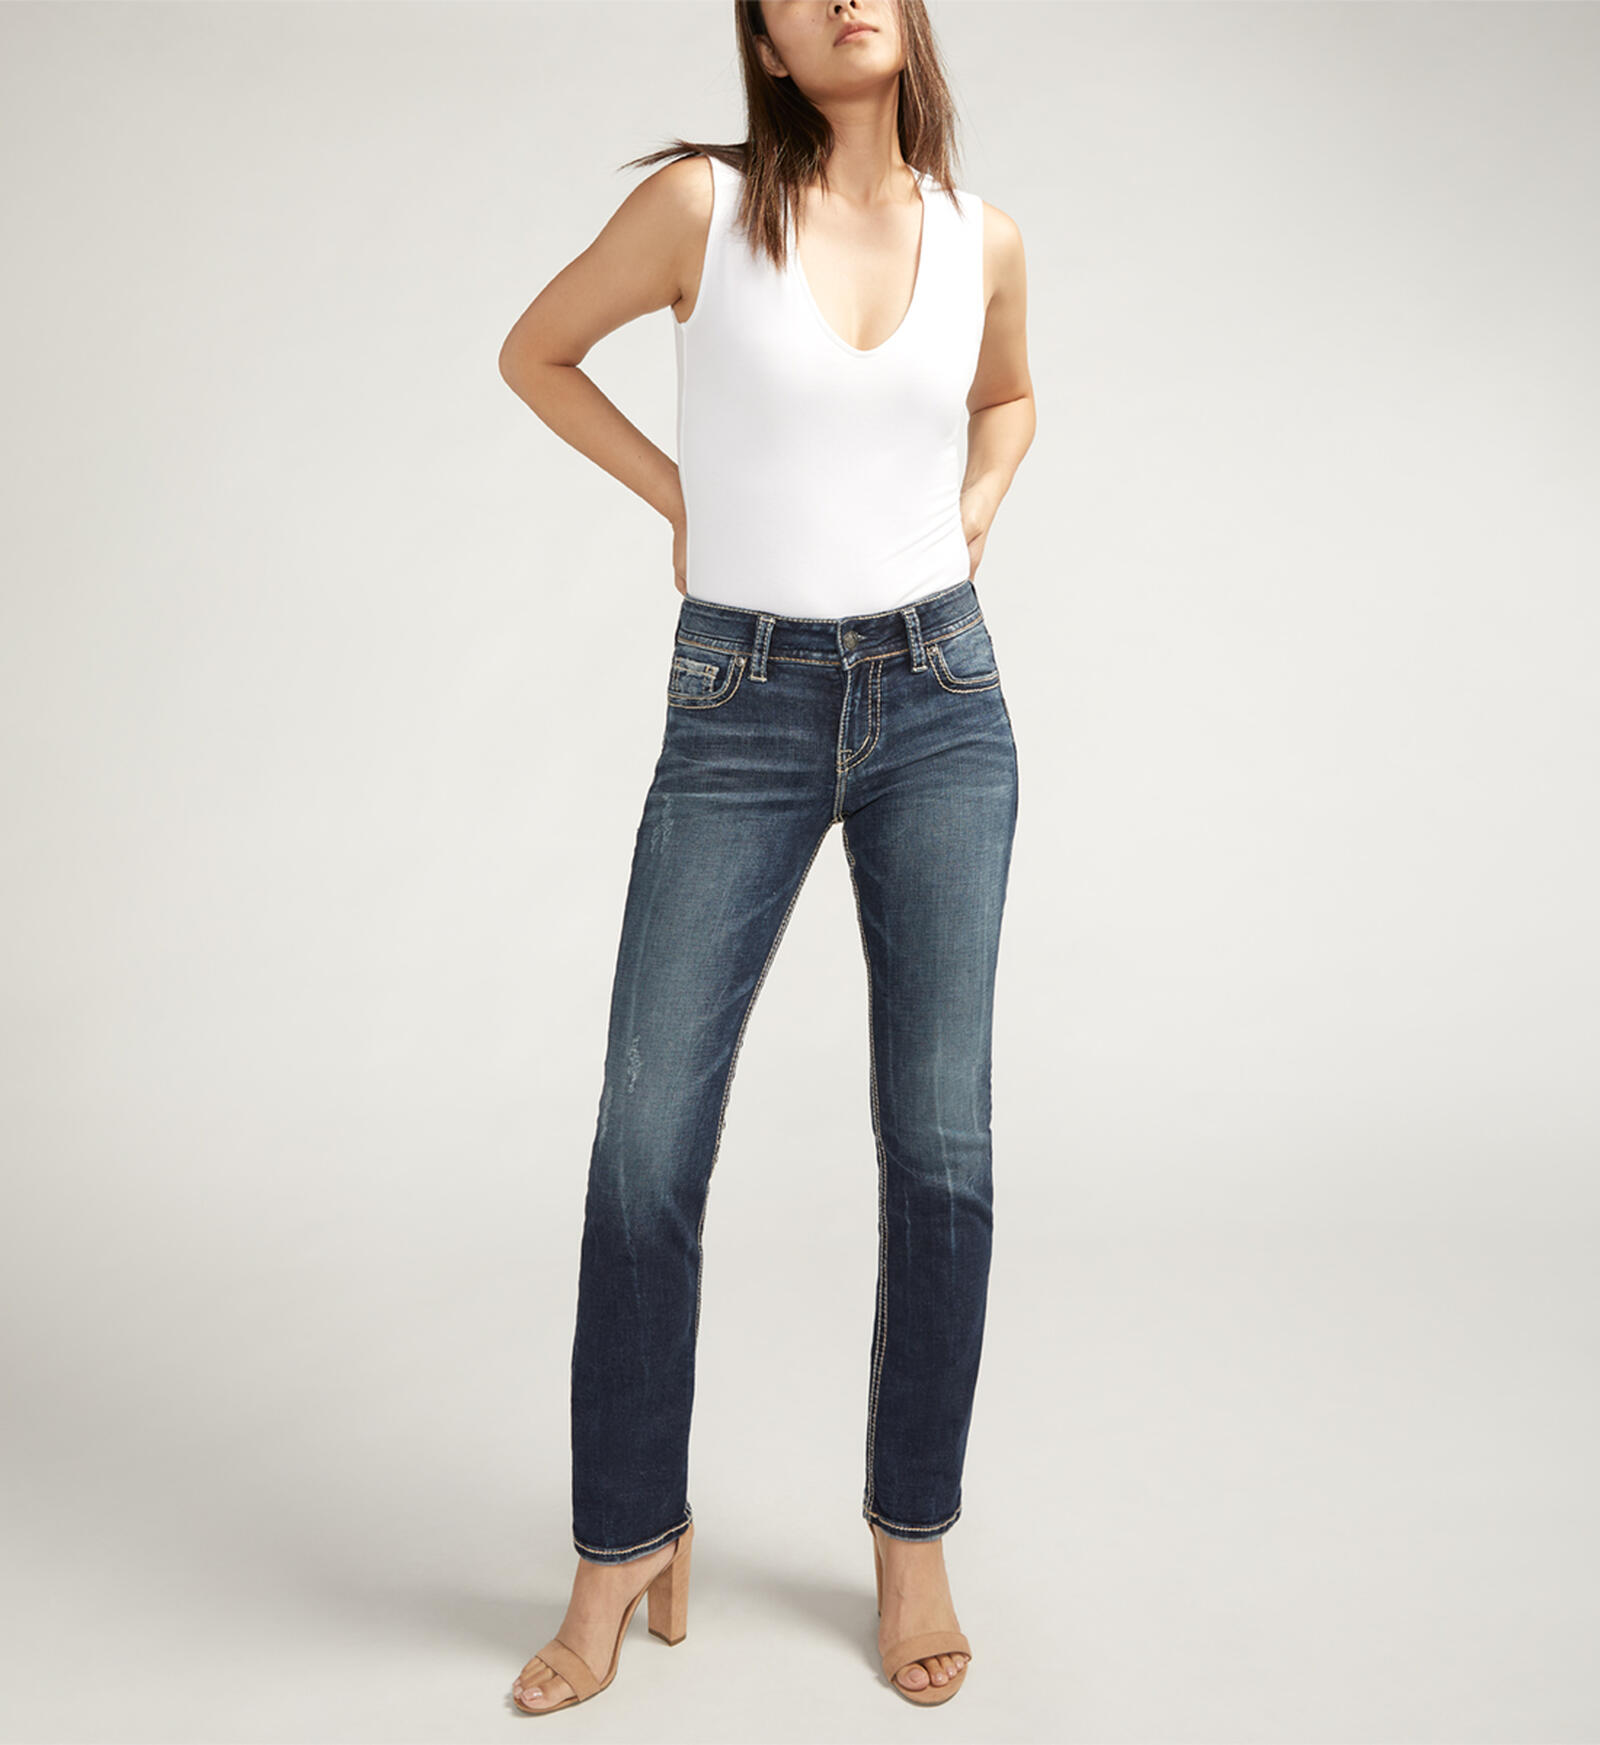 Straight Buy for New Leg Jeans | 104.00 Mid US Rise Silver Suki Jeans USD